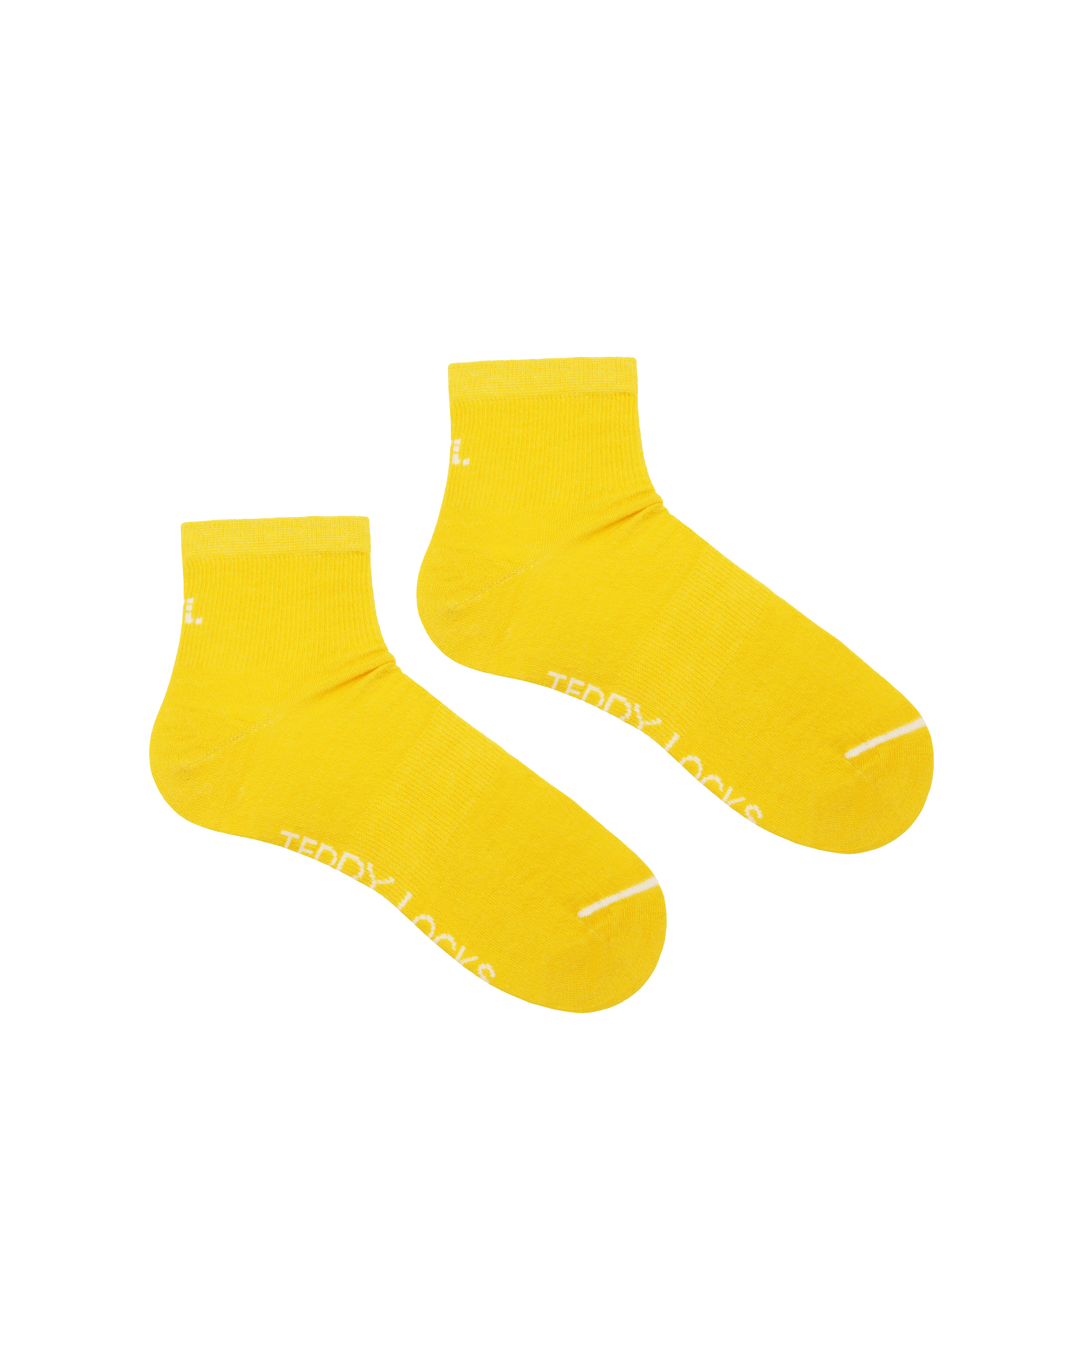 Colorful sustainable socks. Yellow quarter length socks for cycling